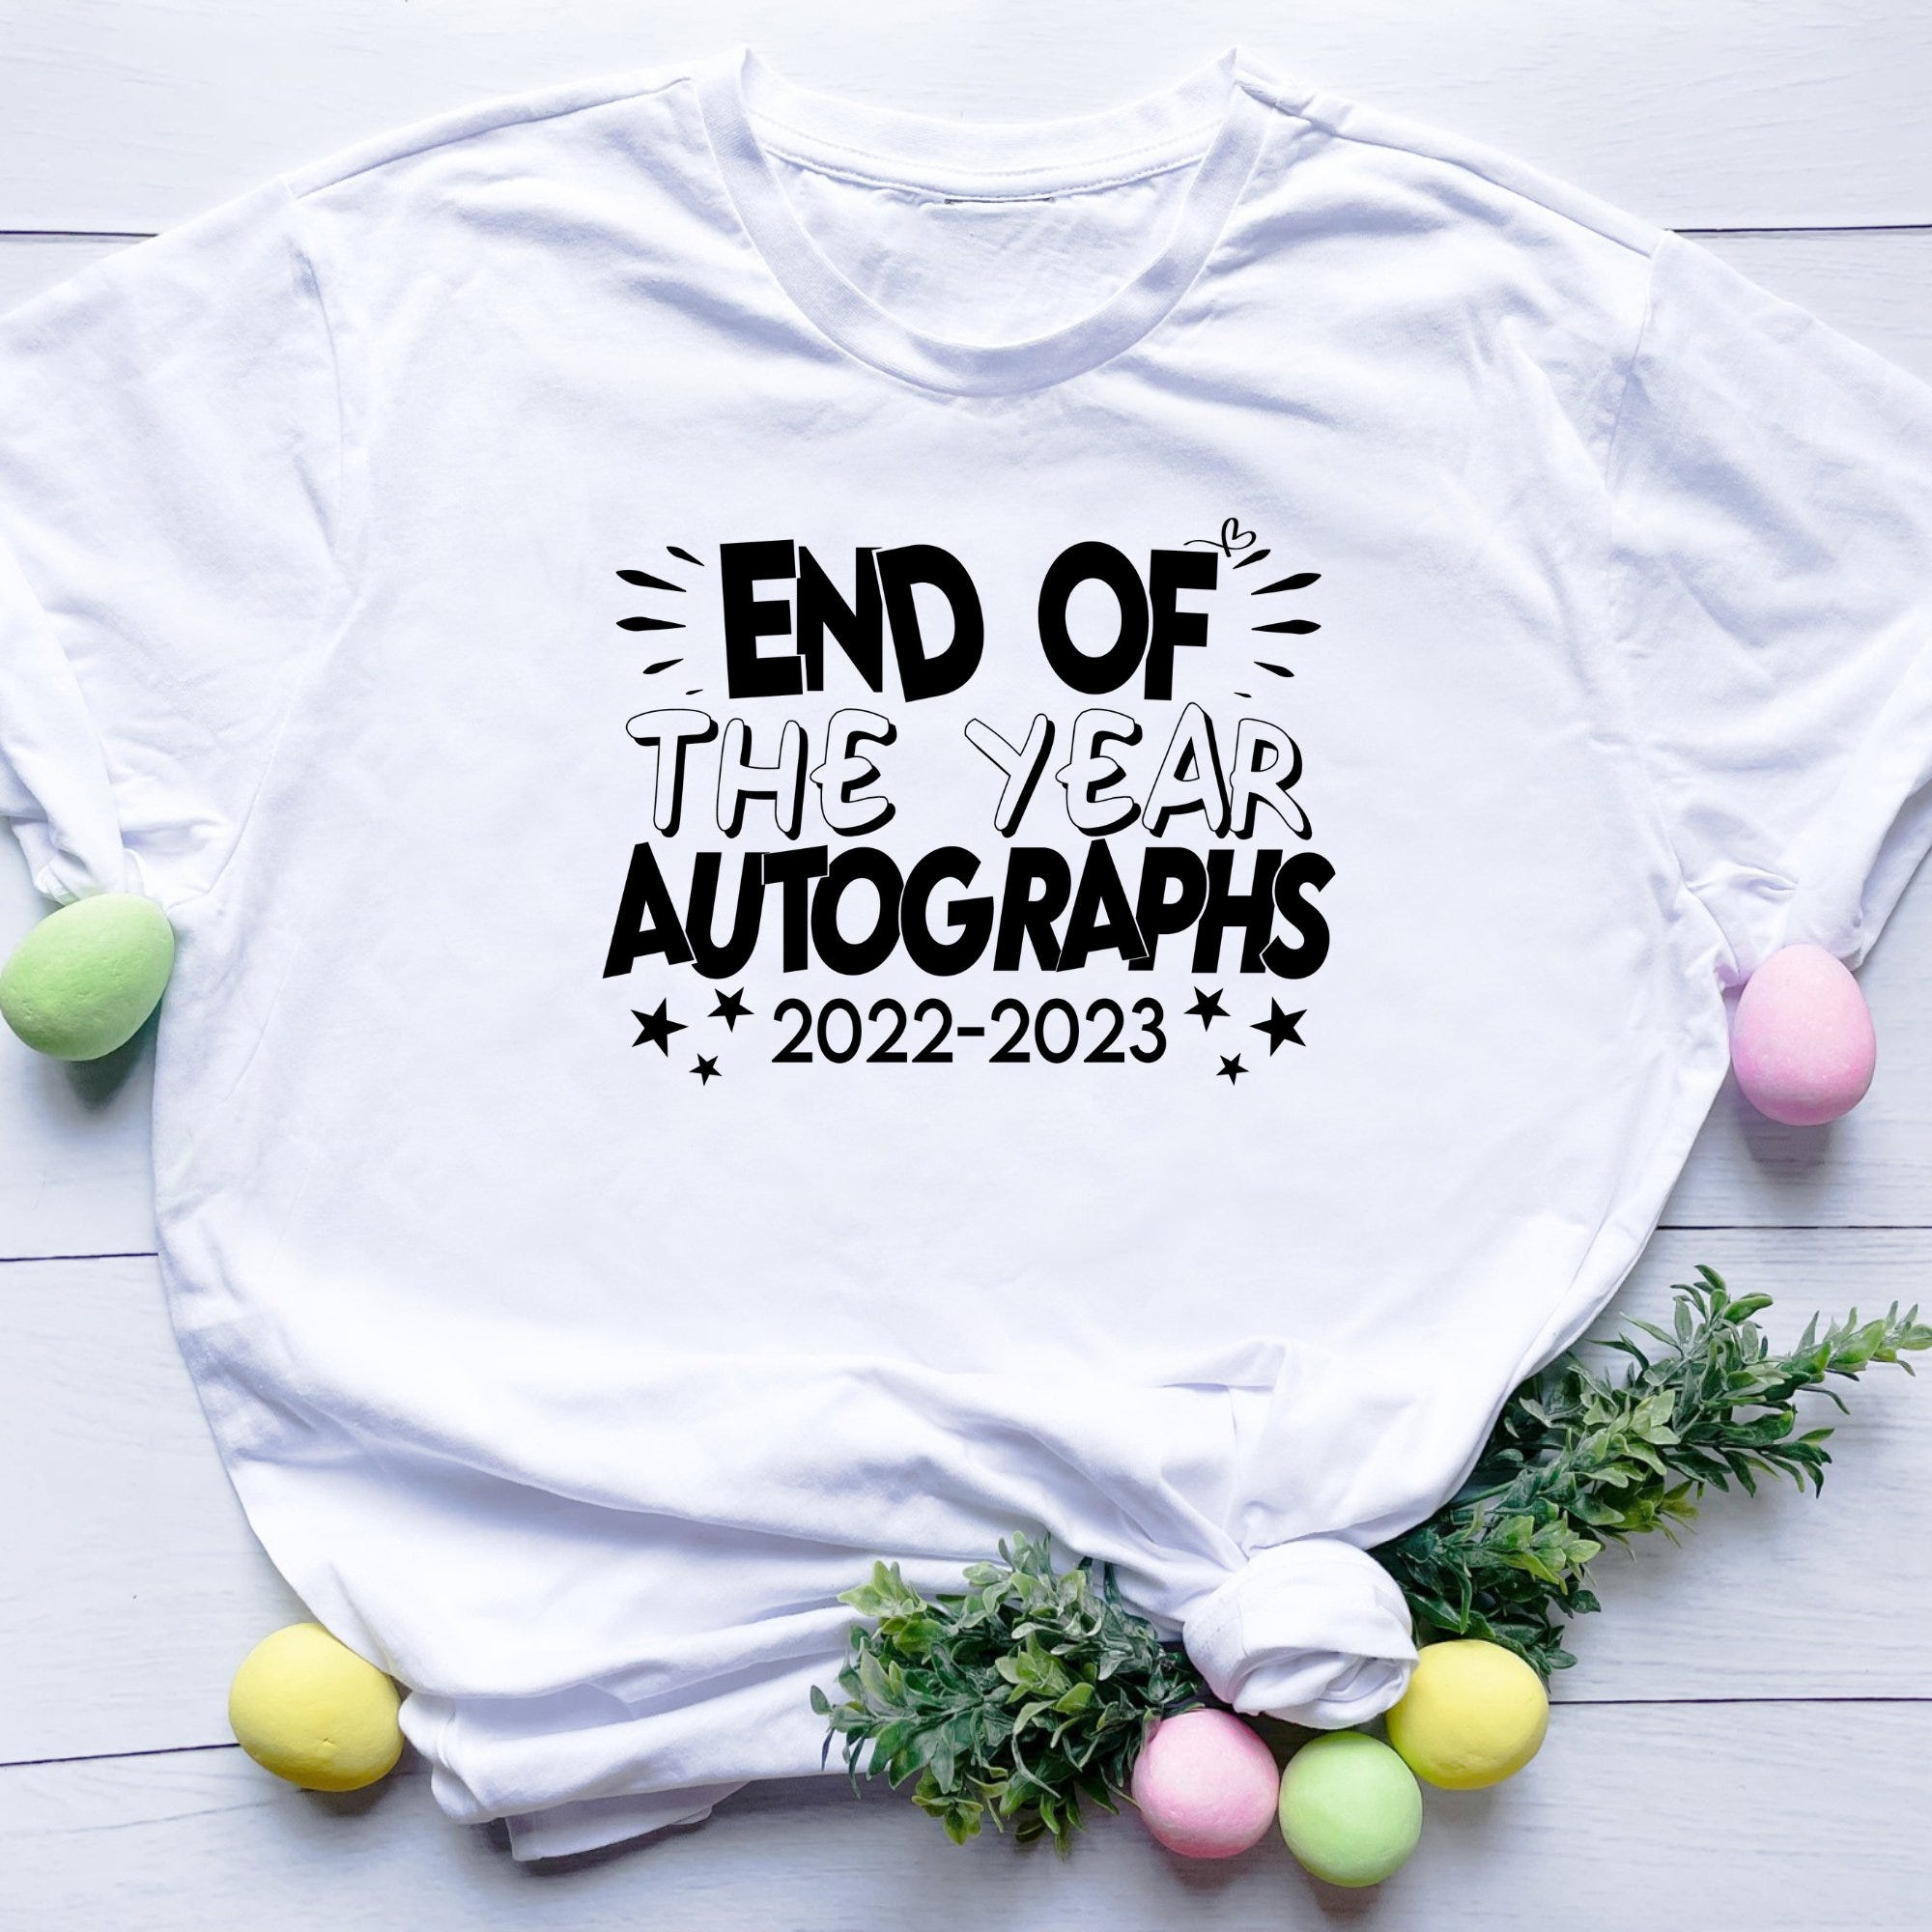 End Of The Year Autographs svg, End Of School svg, Final Day Of School Shirt SVG, Autograph Shirt SVG, End Of The School Year svg, Cut file